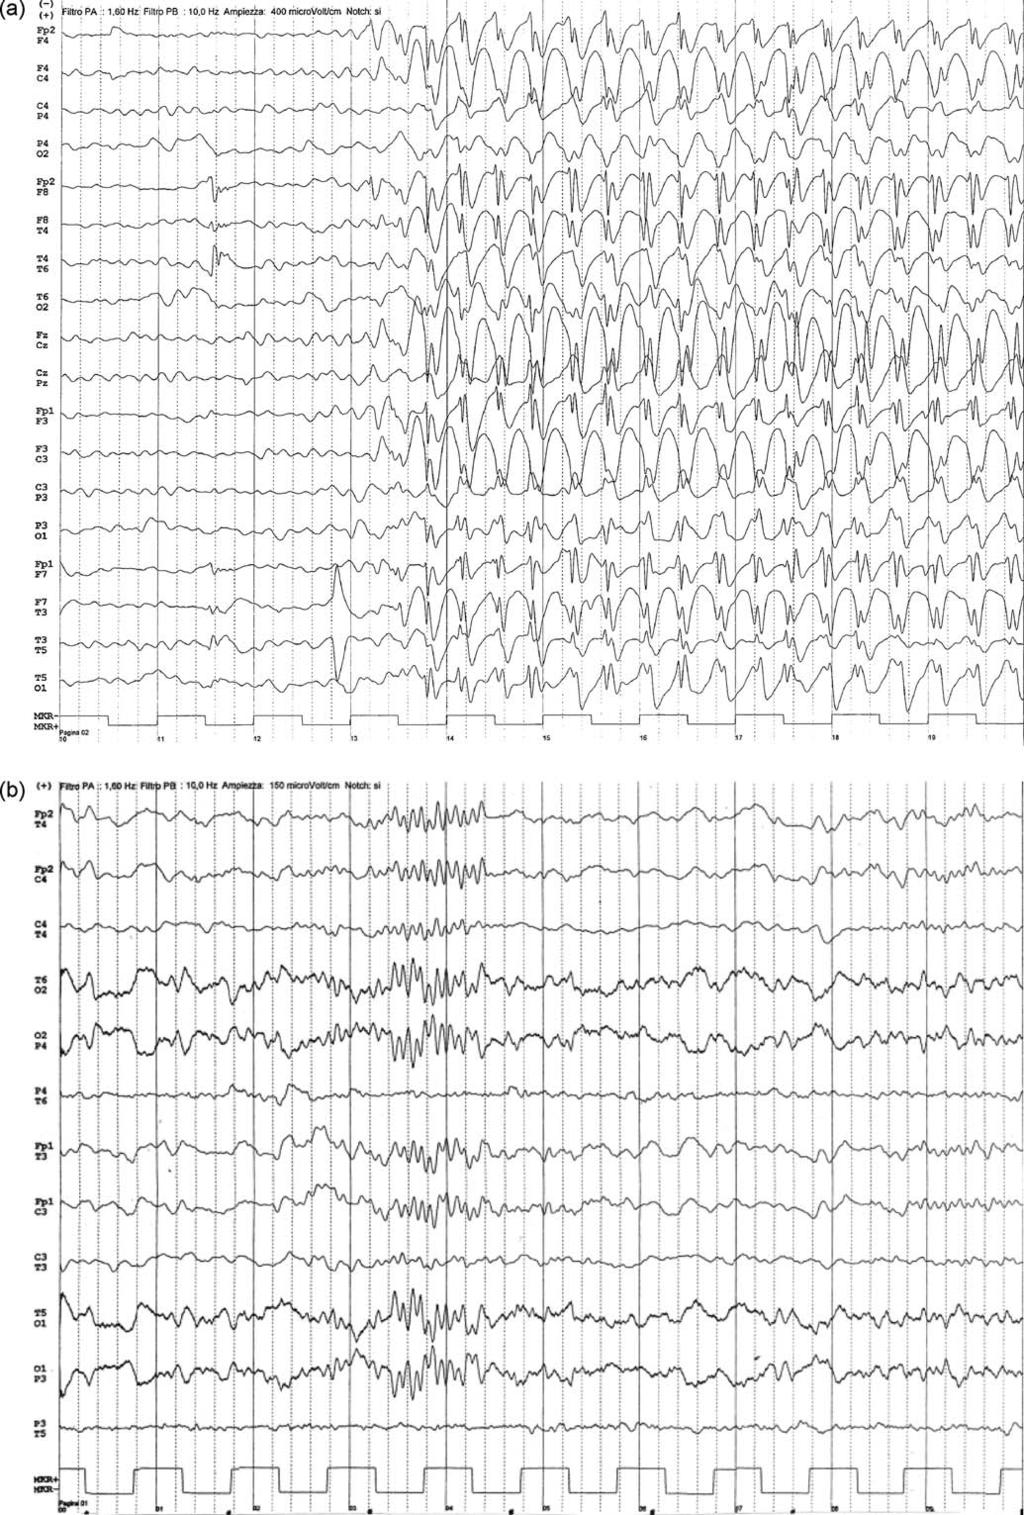 A. Verrotti et al. / Seizure 19 (2010) 368 372 371 Fig. 2. (a) The ictal EEG showing generalized spike wave activity during a typical absence, after 3 years from onset of G-ICOE.